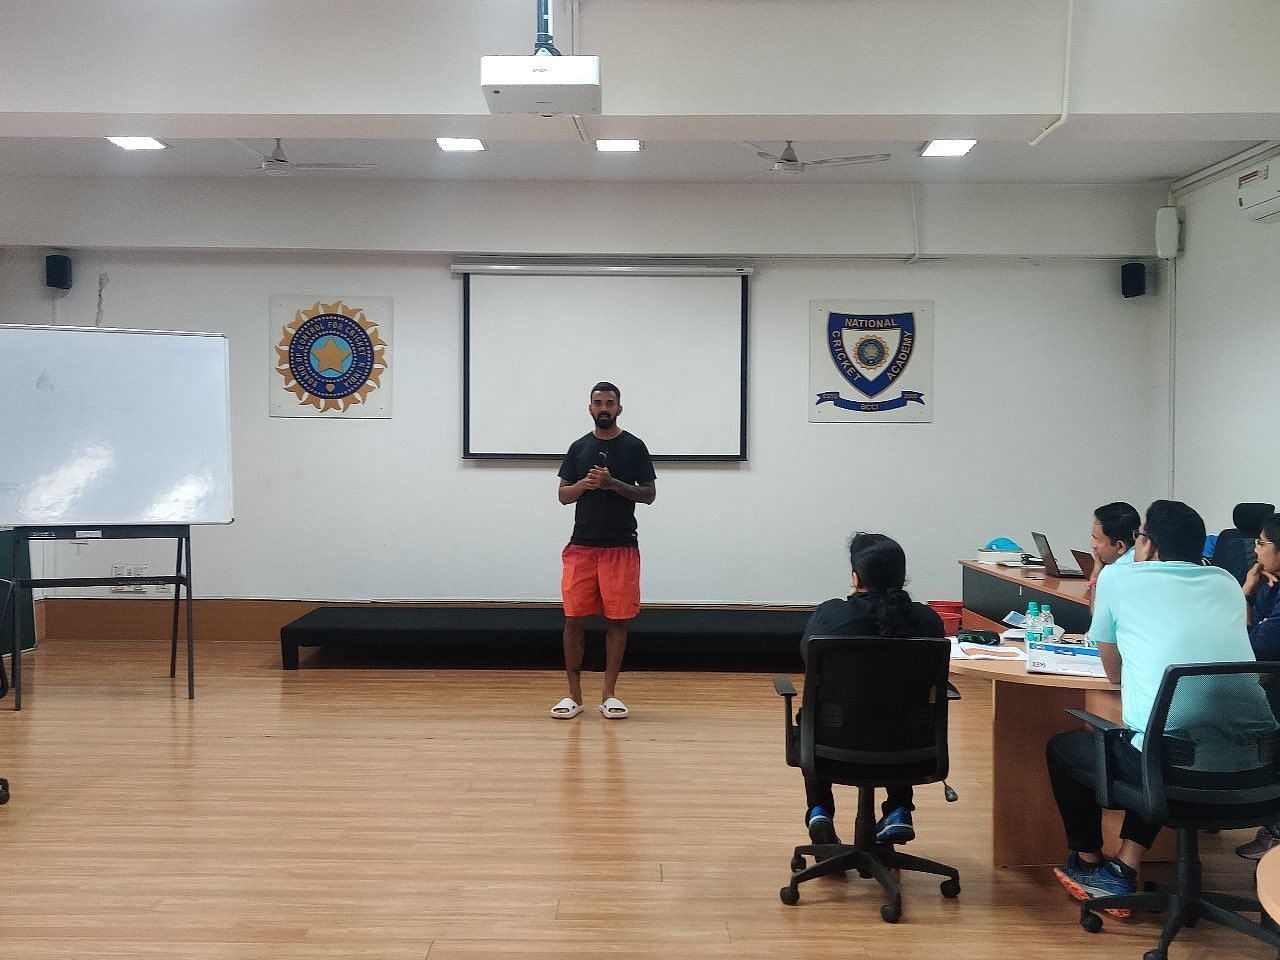 KL Rahul sharing his thoughts with candidates attending the Level-3 coach certification course at the NCA. Pic: VVS Laxman/ Twitter